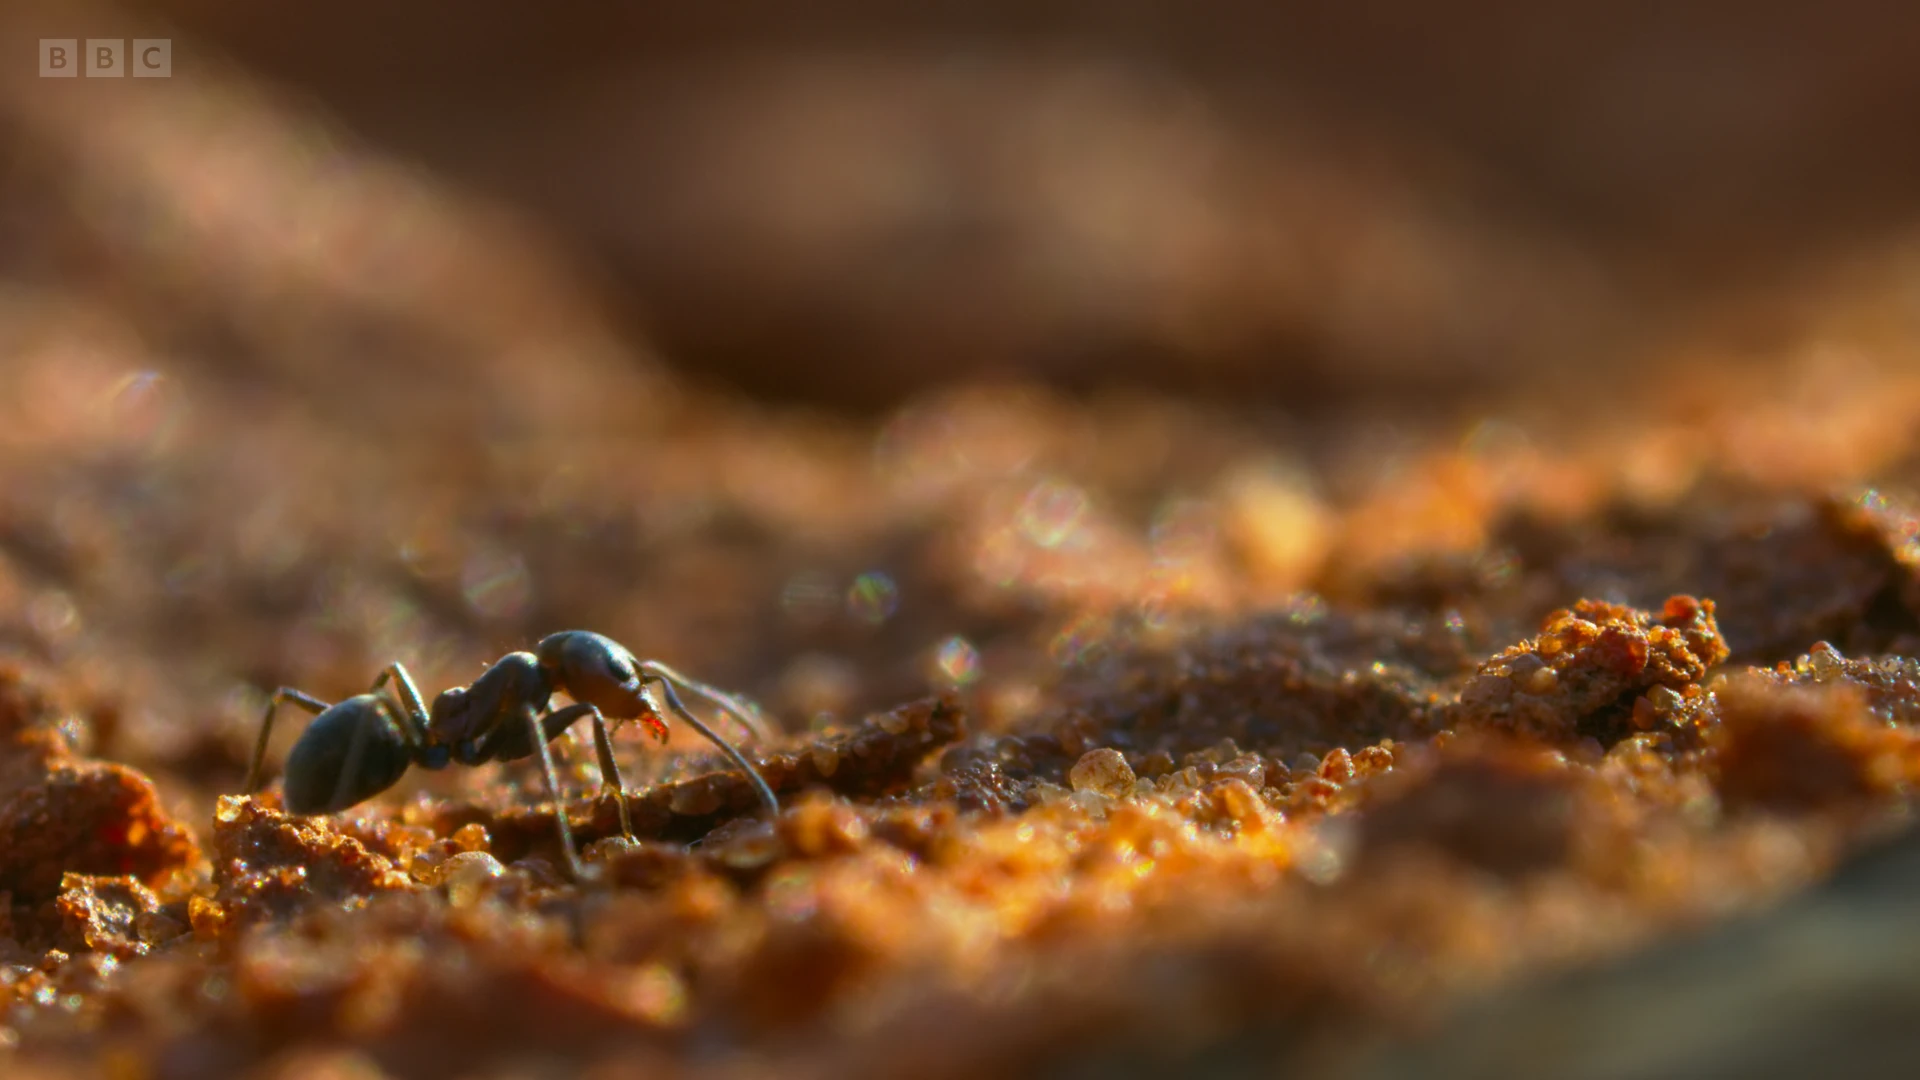 Ant sp. () as shown in Seven Worlds, One Planet - Australia